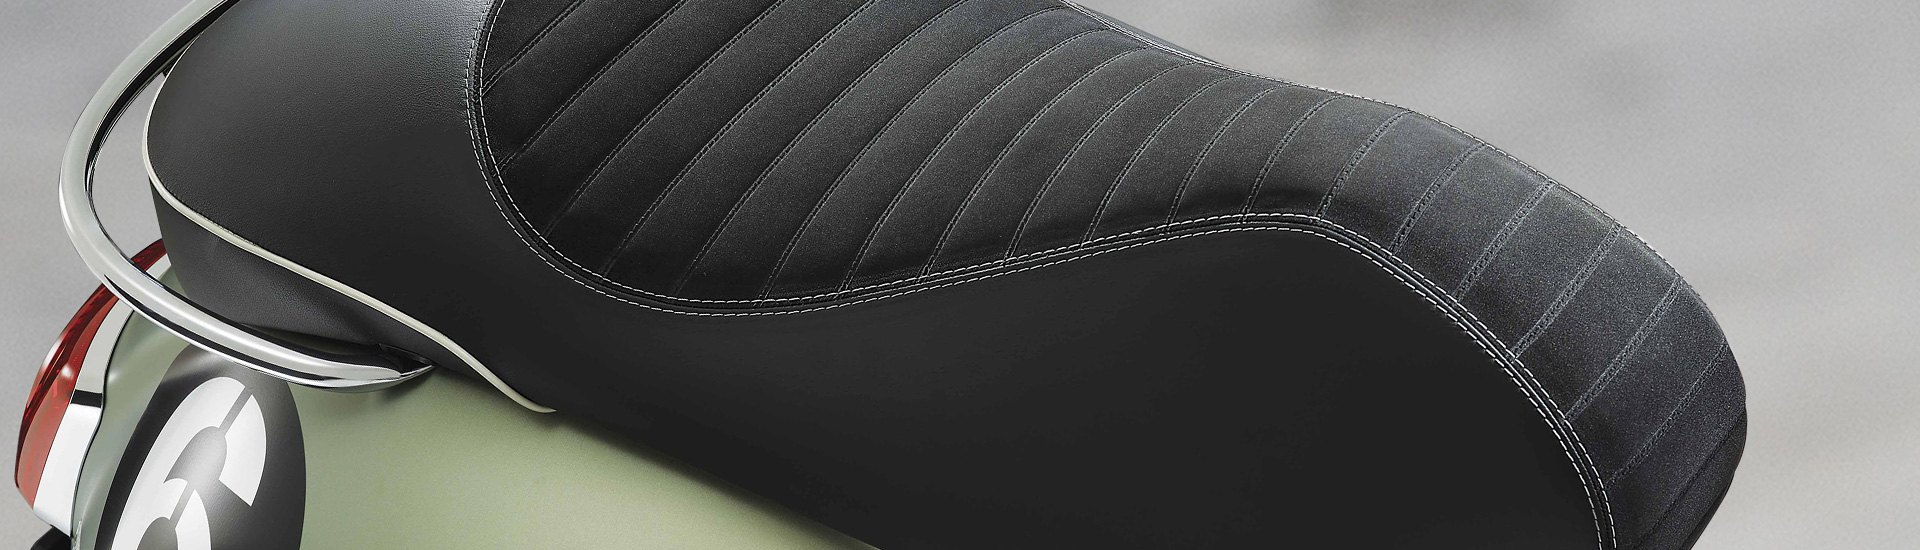 Motorcycle Seats & Seat Covers